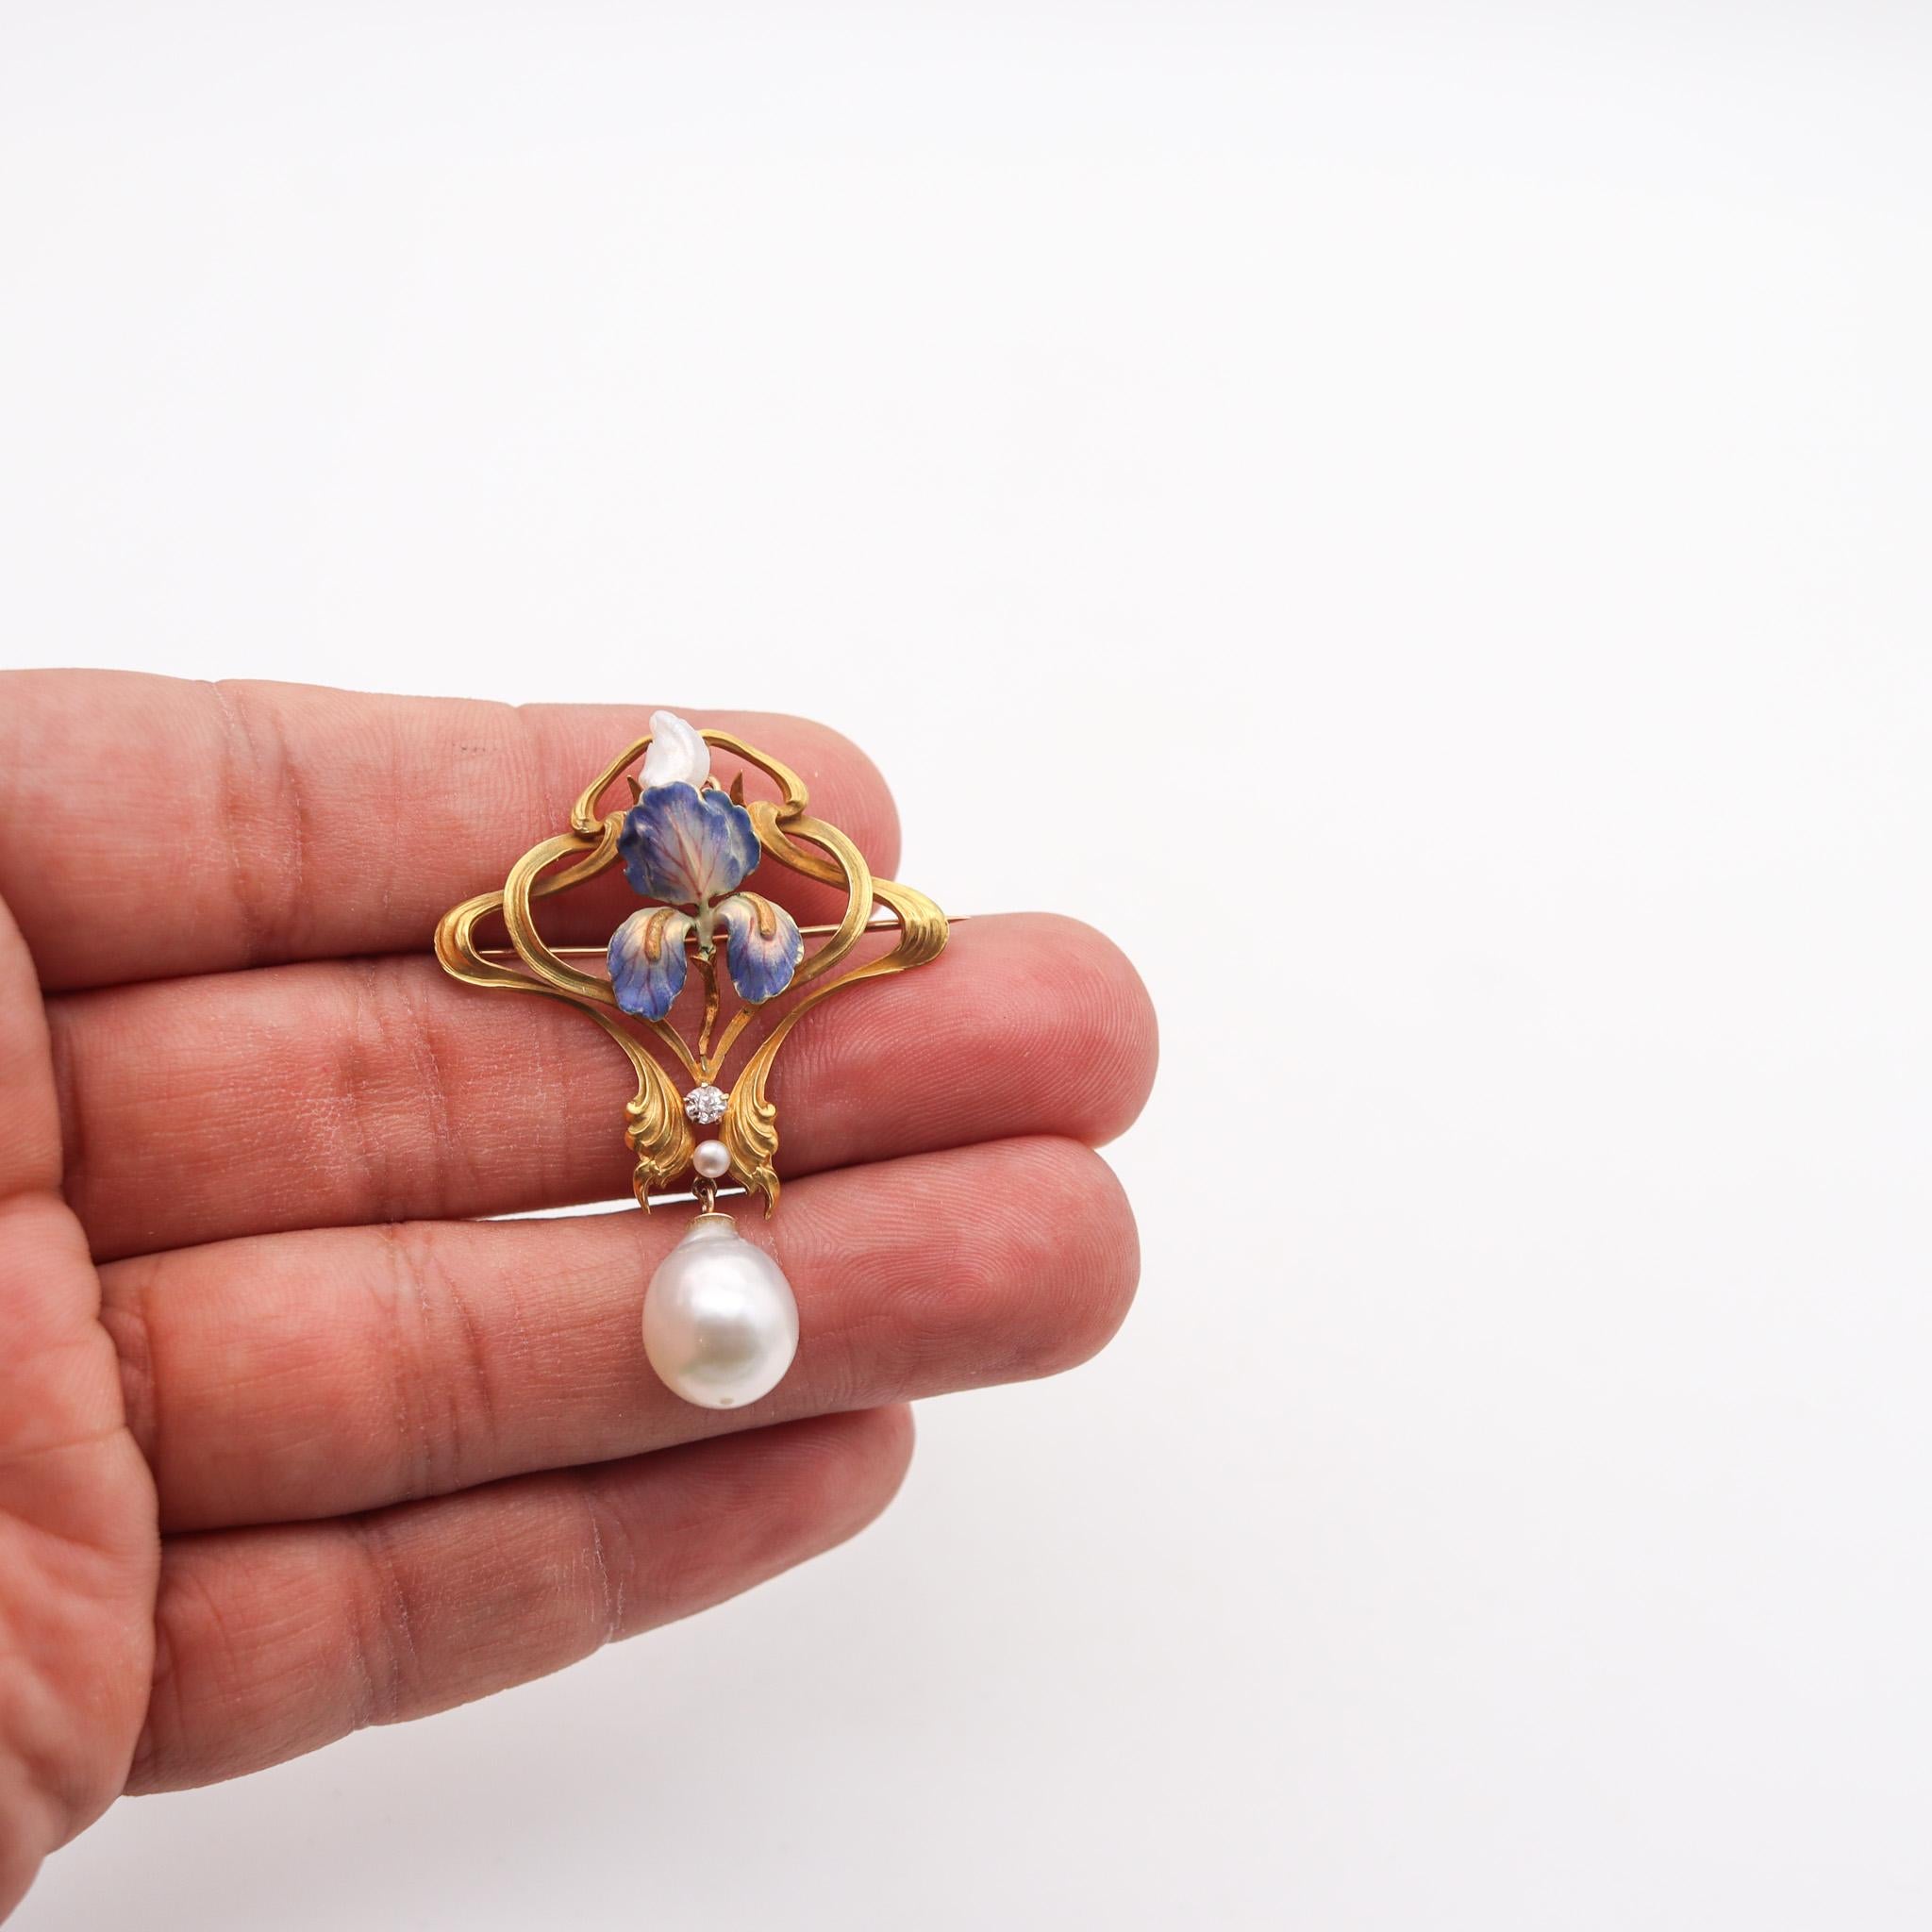 Art Nouveau 1900 Enamel Orchid Pendant In 14Kt Gold With Diamond And Pearls In Excellent Condition For Sale In Miami, FL